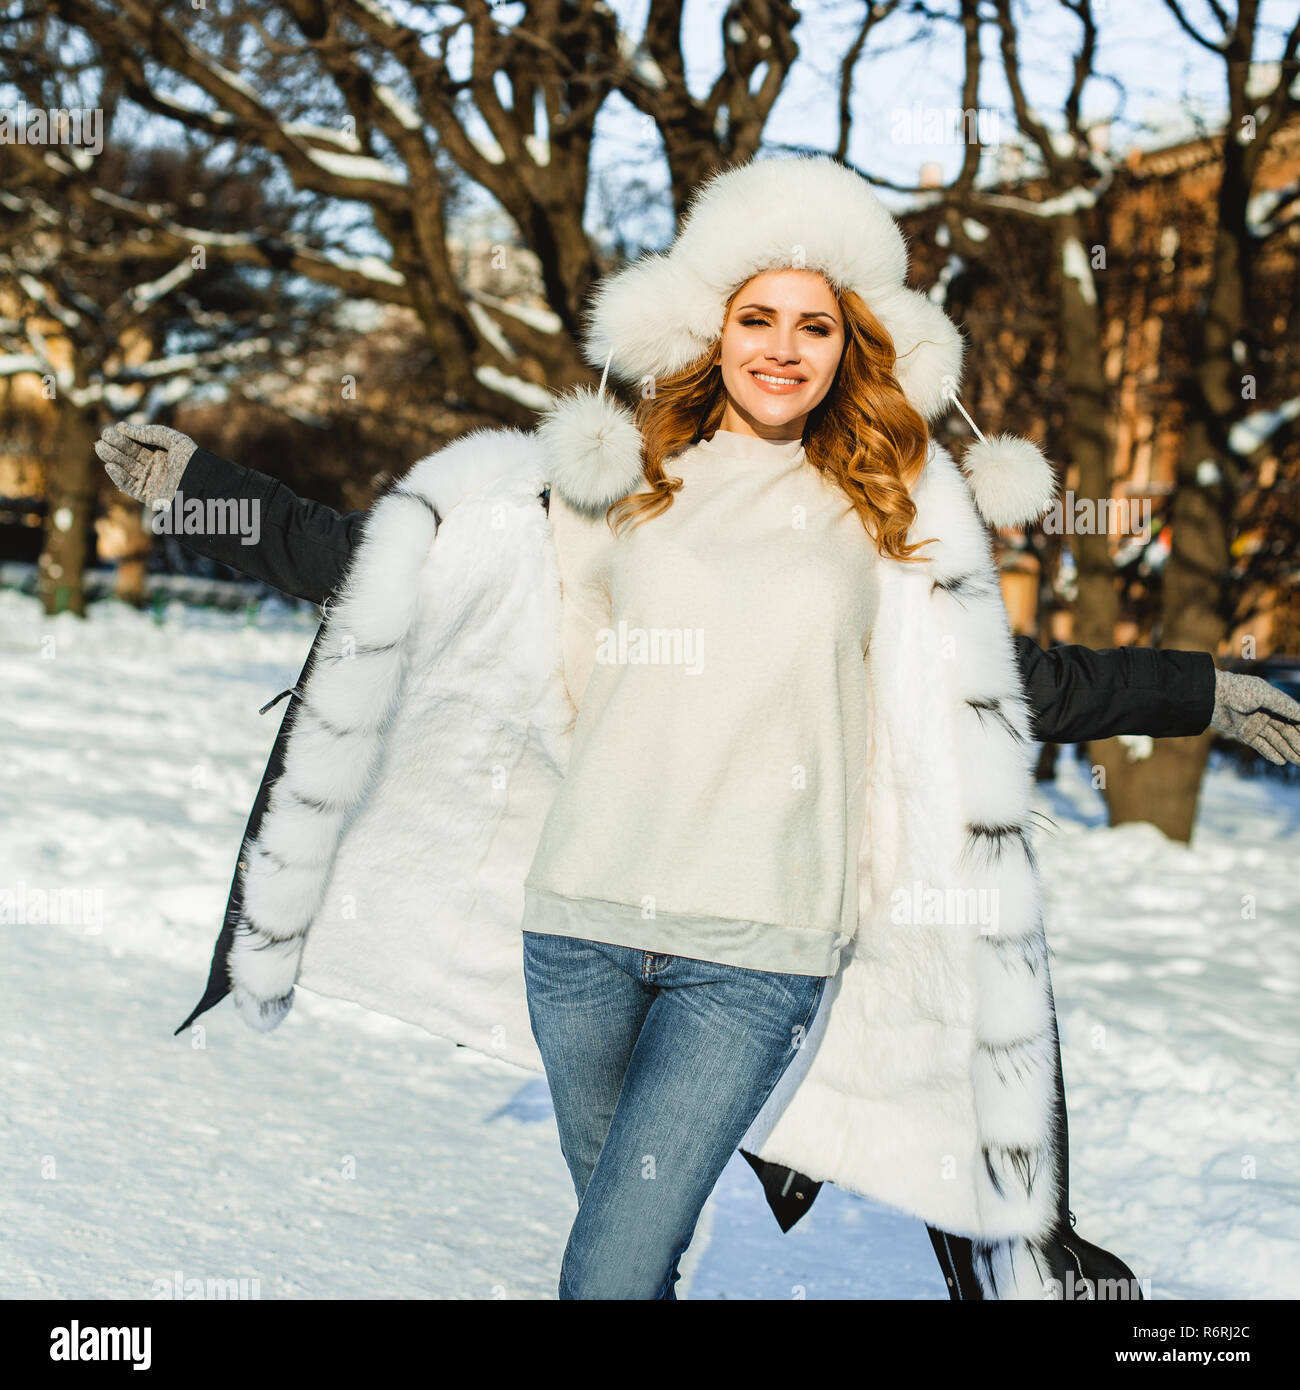 Winter beauty. Young happy woman wearing winter coat and hat outdoors ...